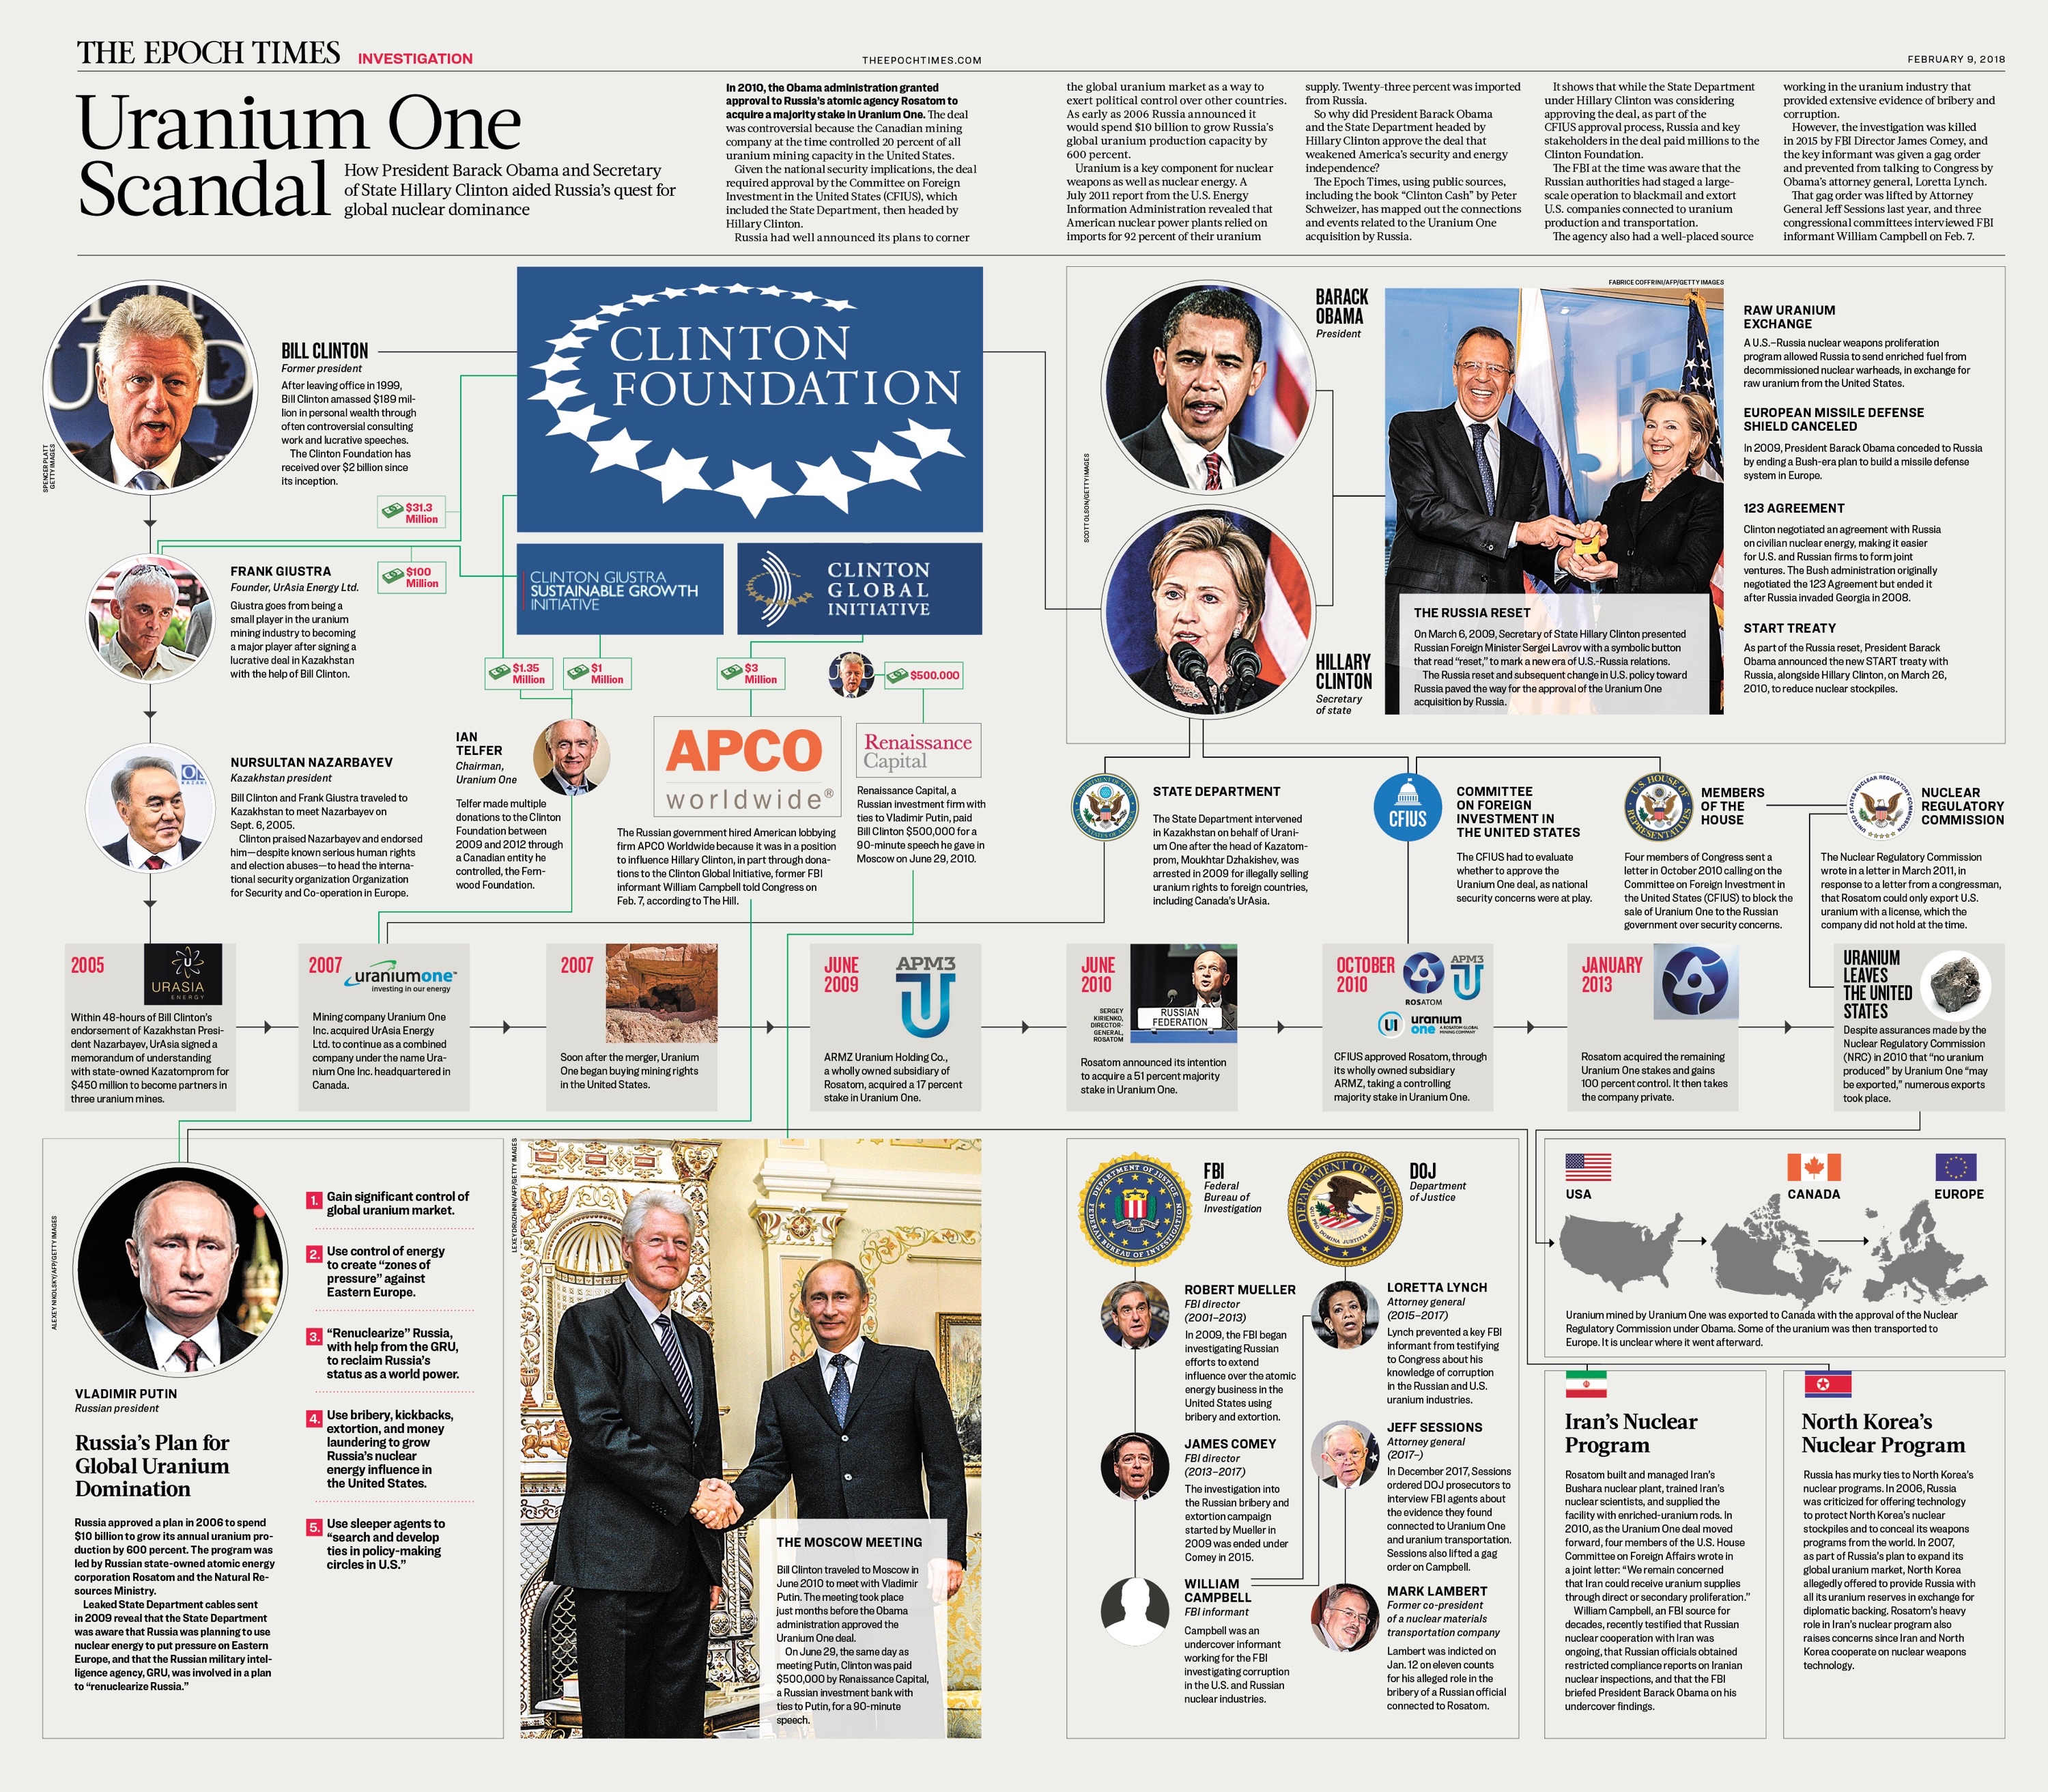 Epoch Times' epic infographic on Uranium One (vid link inside)